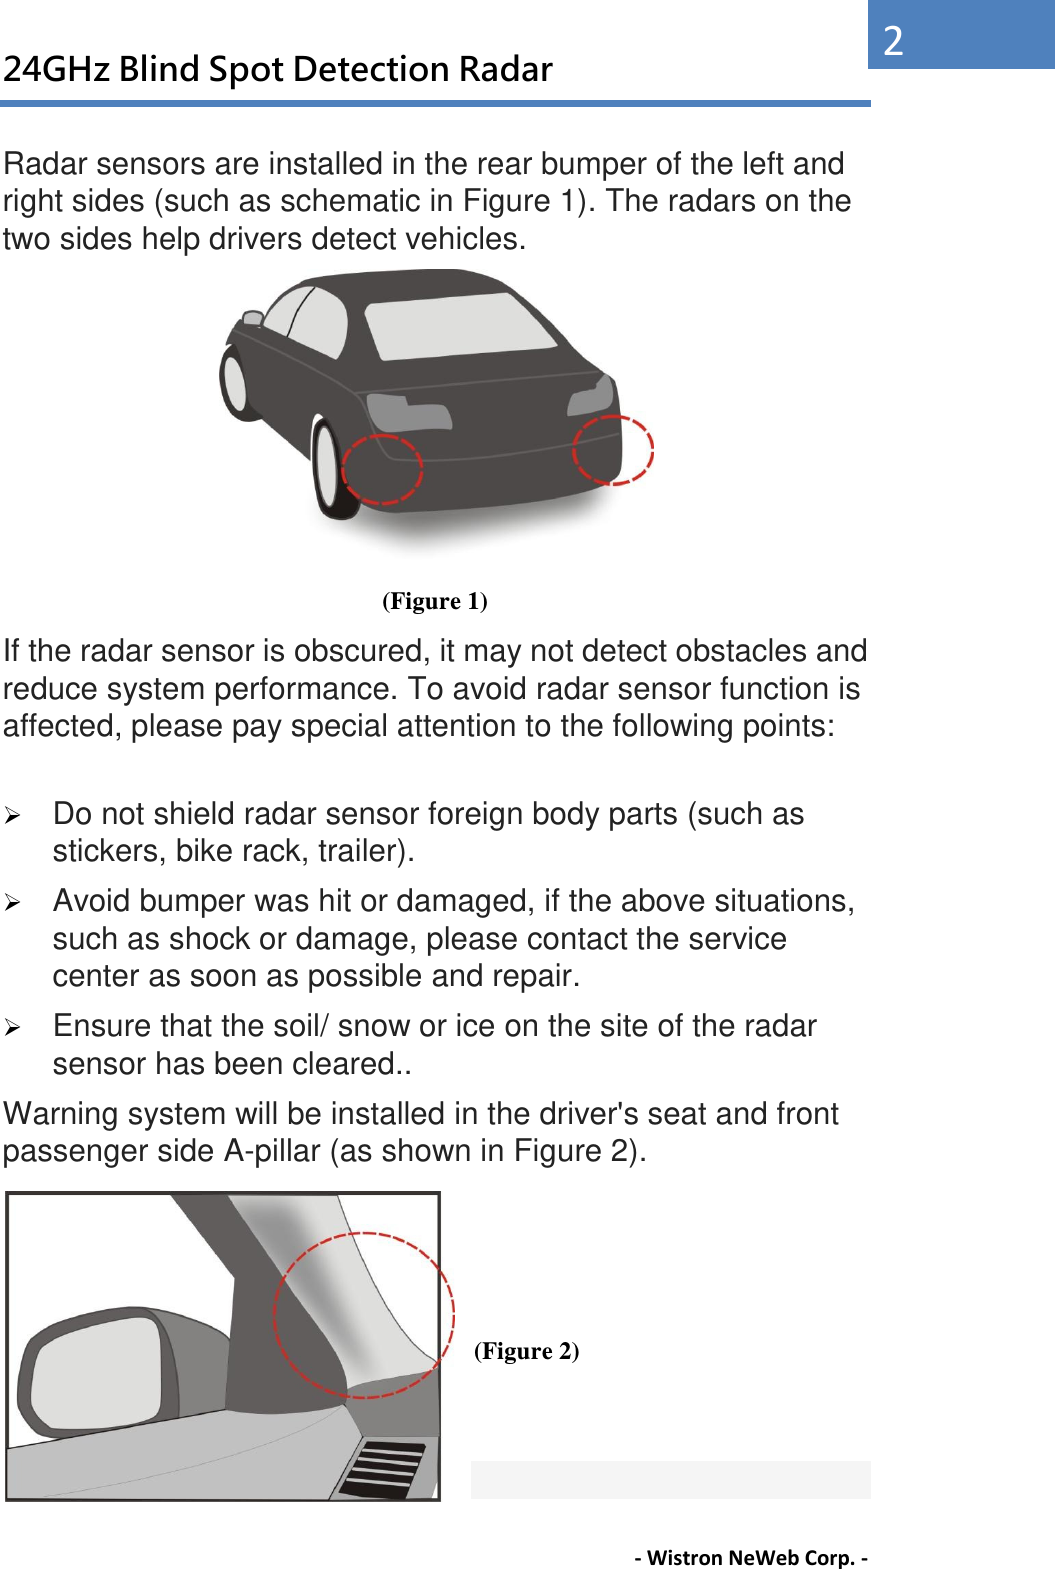 24GHz Blind Spot Detection Radar - Wistron NeWeb Corp. - 2 Radar sensors are installed in the rear bumper of the left and right sides (such as schematic in Figure 1). The radars on the two sides help drivers detect vehicles.  (Figure 1) If the radar sensor is obscured, it may not detect obstacles and reduce system performance. To avoid radar sensor function is affected, please pay special attention to the following points:     Do not shield radar sensor foreign body parts (such as stickers, bike rack, trailer).    Avoid bumper was hit or damaged, if the above situations, such as shock or damage, please contact the service center as soon as possible and repair.    Ensure that the soil/ snow or ice on the site of the radar sensor has been cleared.. Warning system will be installed in the driver&apos;s seat and front passenger side A-pillar (as shown in Figure 2).       (Figure 2)   